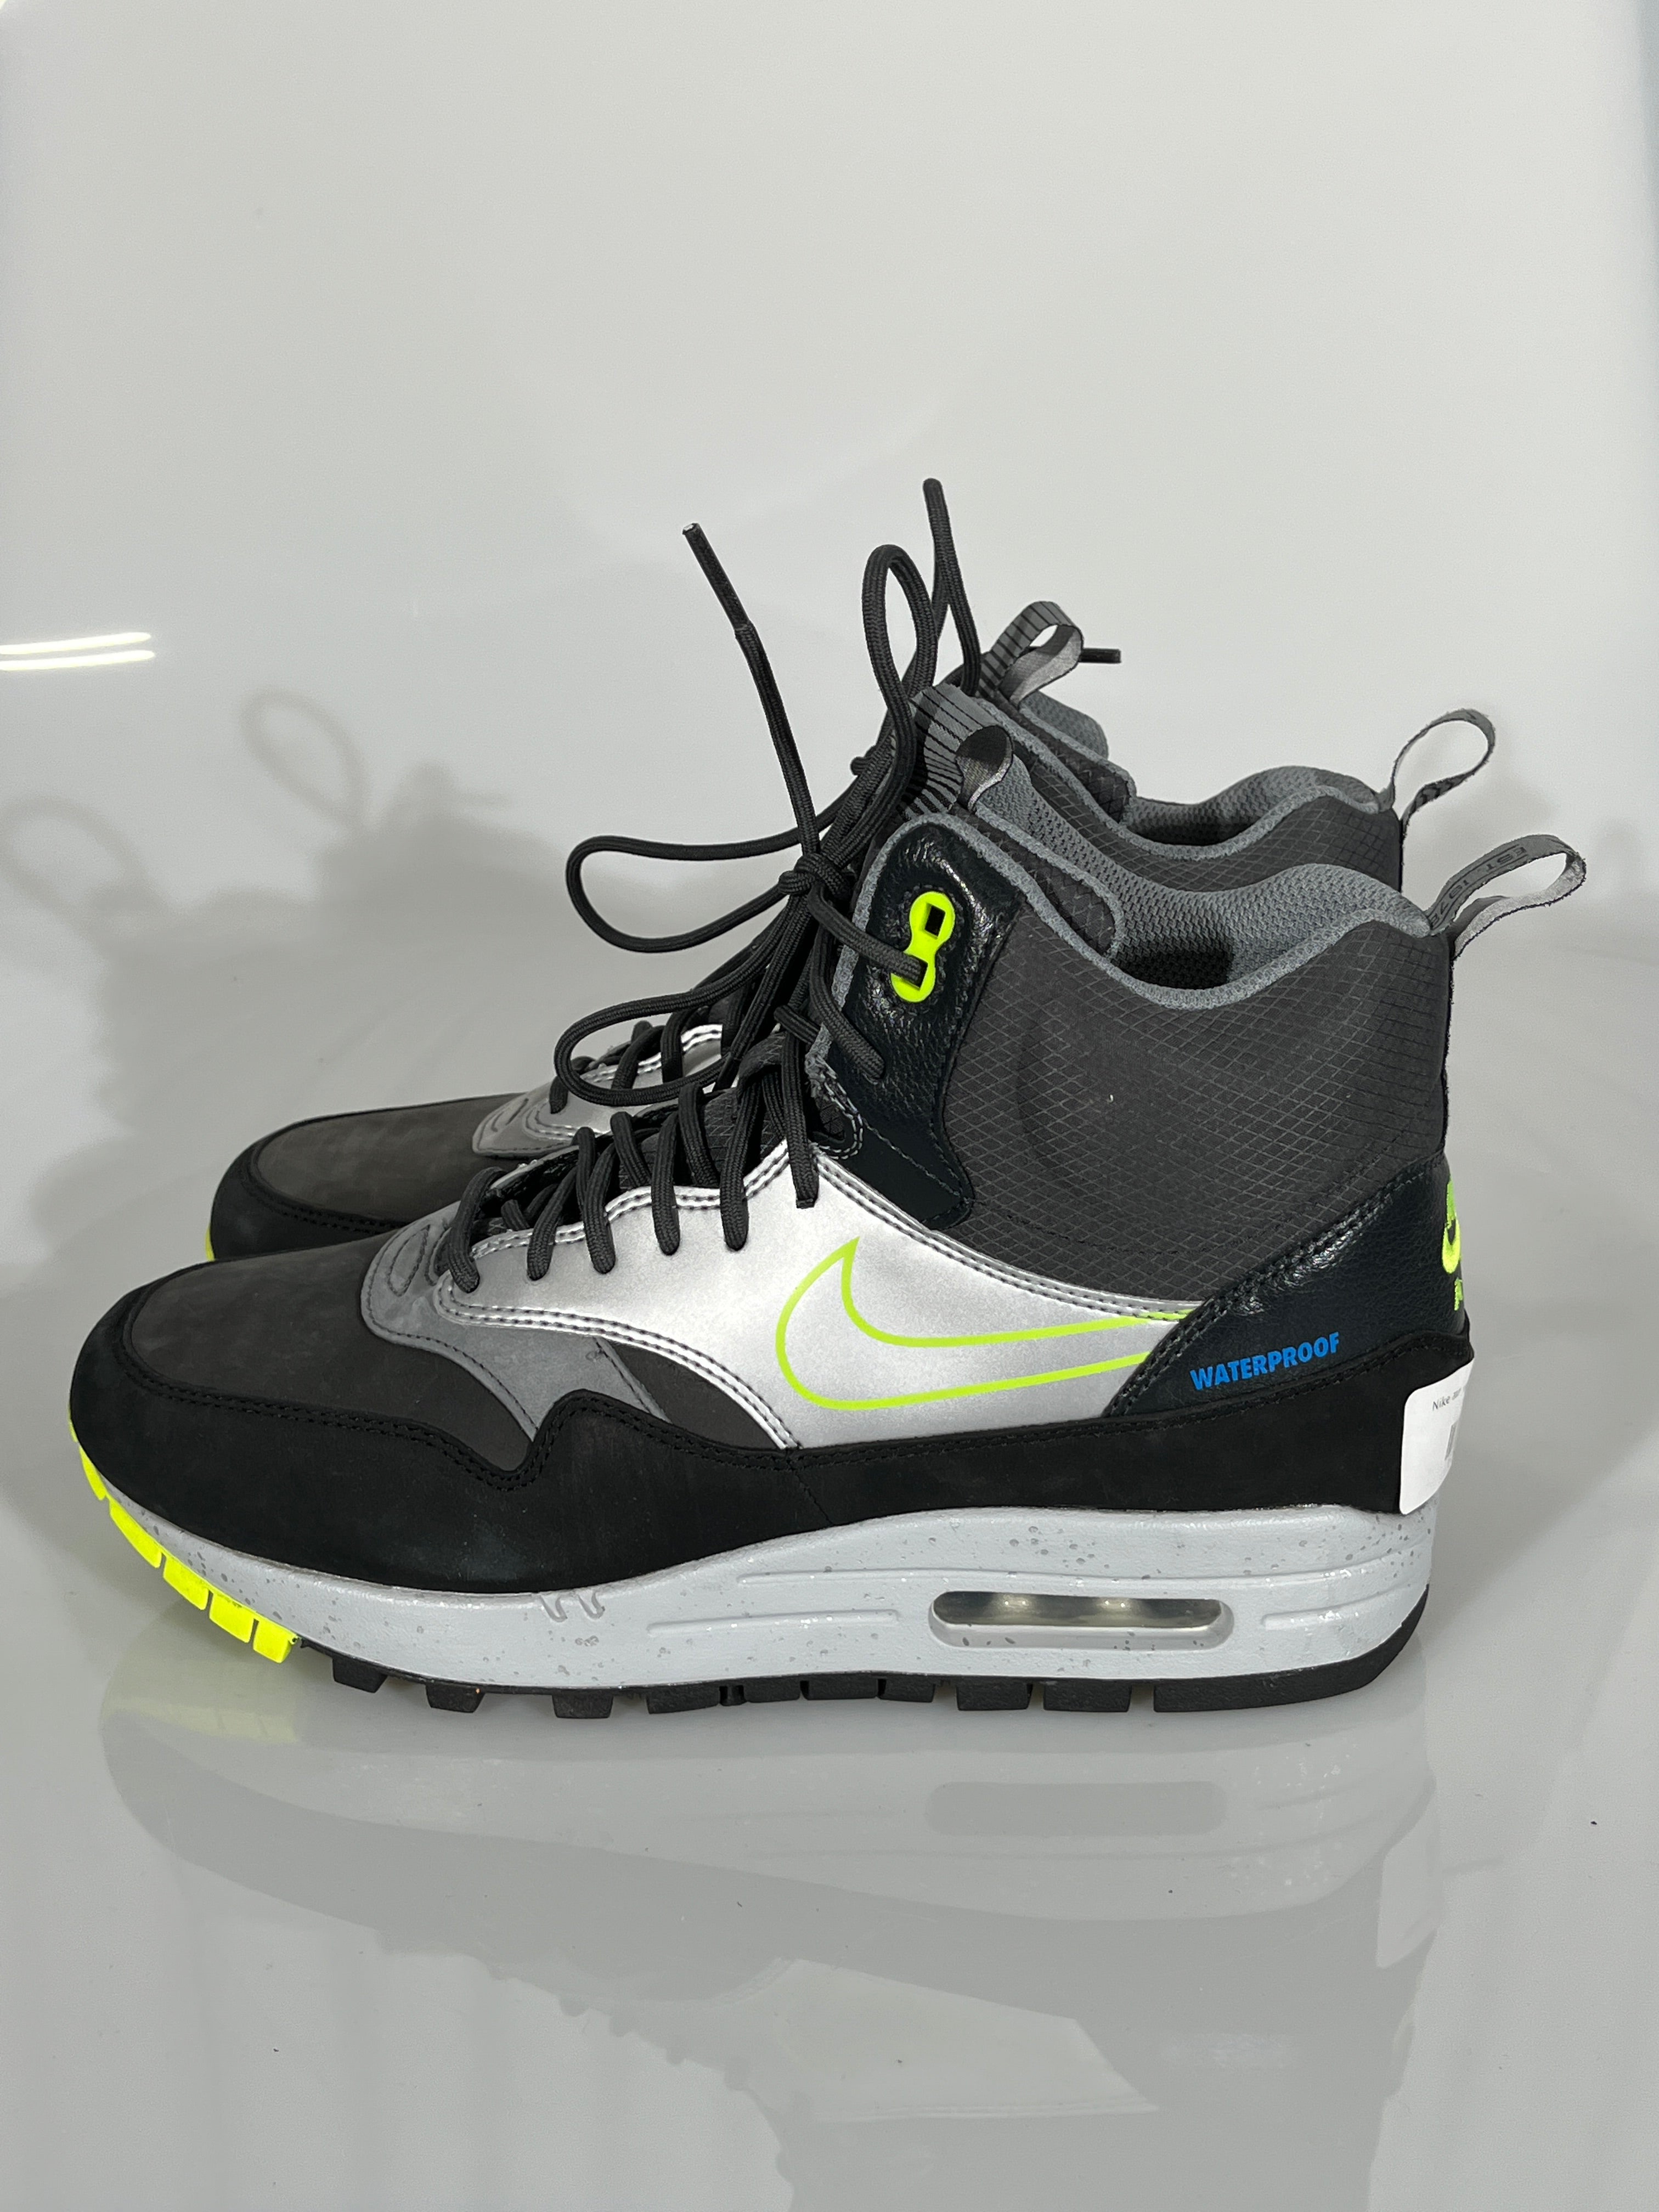 Nike Air Waterproof High Top Shoes – The Locals Sale